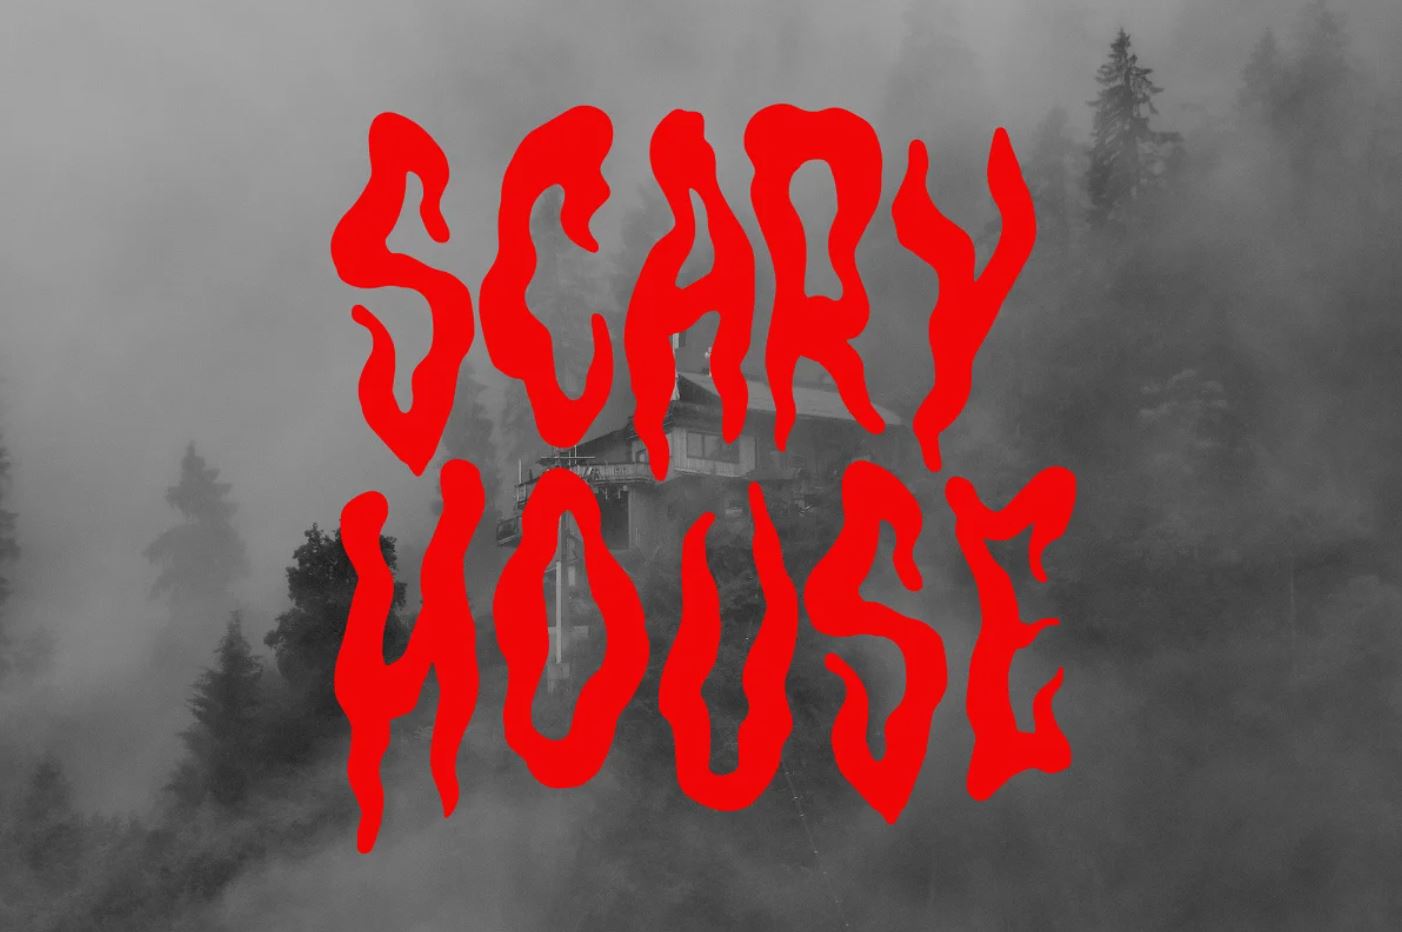 Scary halloween font with wavy look 